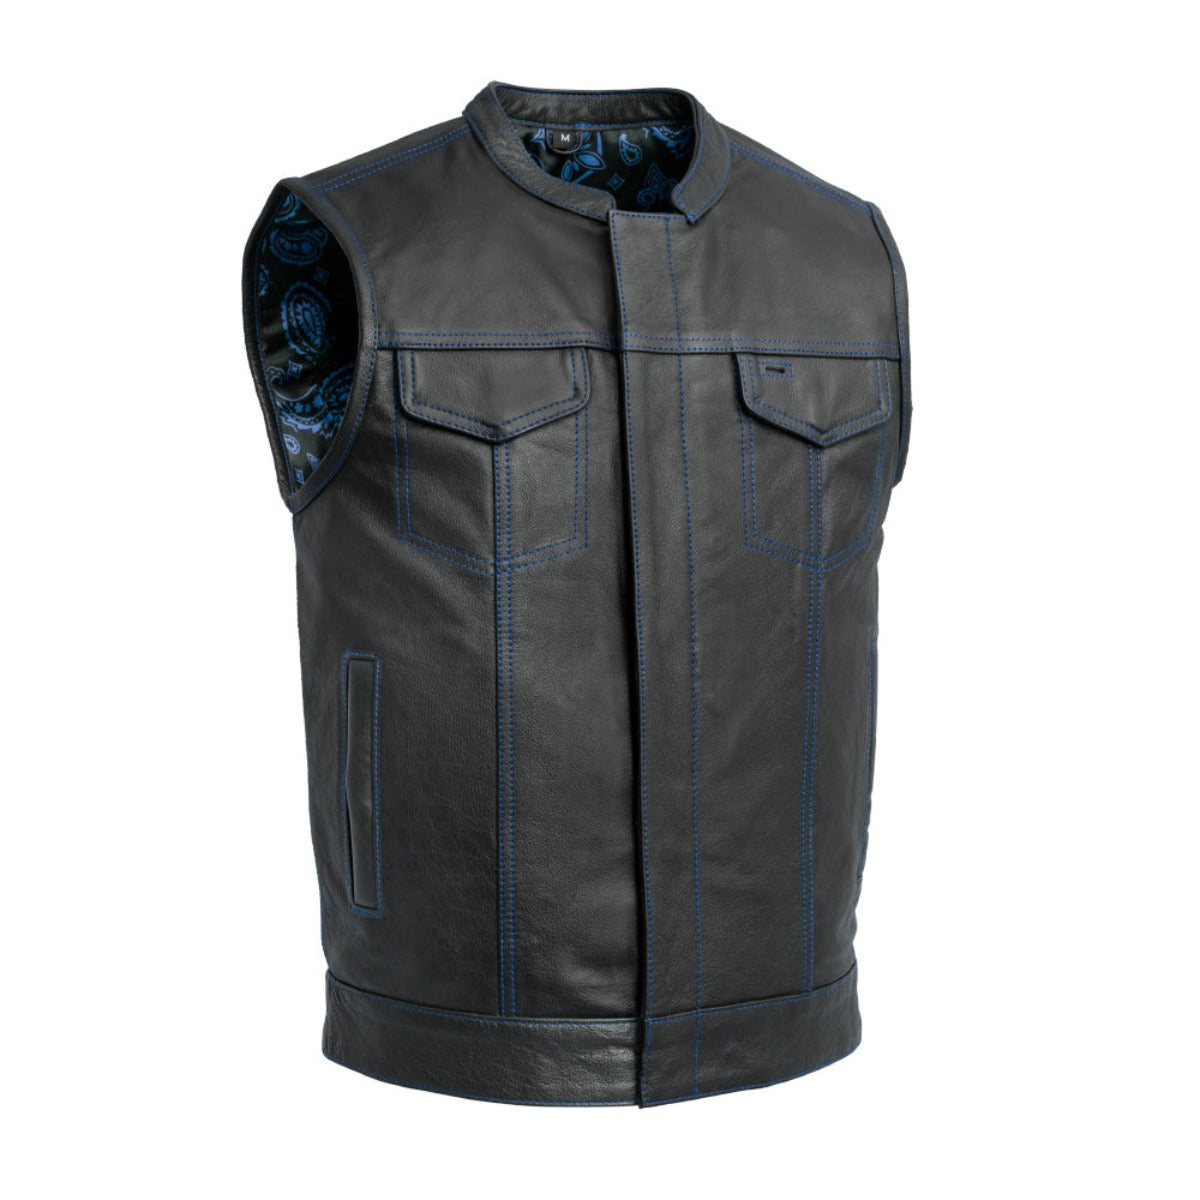 A First Manufacturing Men's The Cut Motorcycle Leather Vest made of milled cowhide with blue stitching, a budget-friendly alternative to other options.